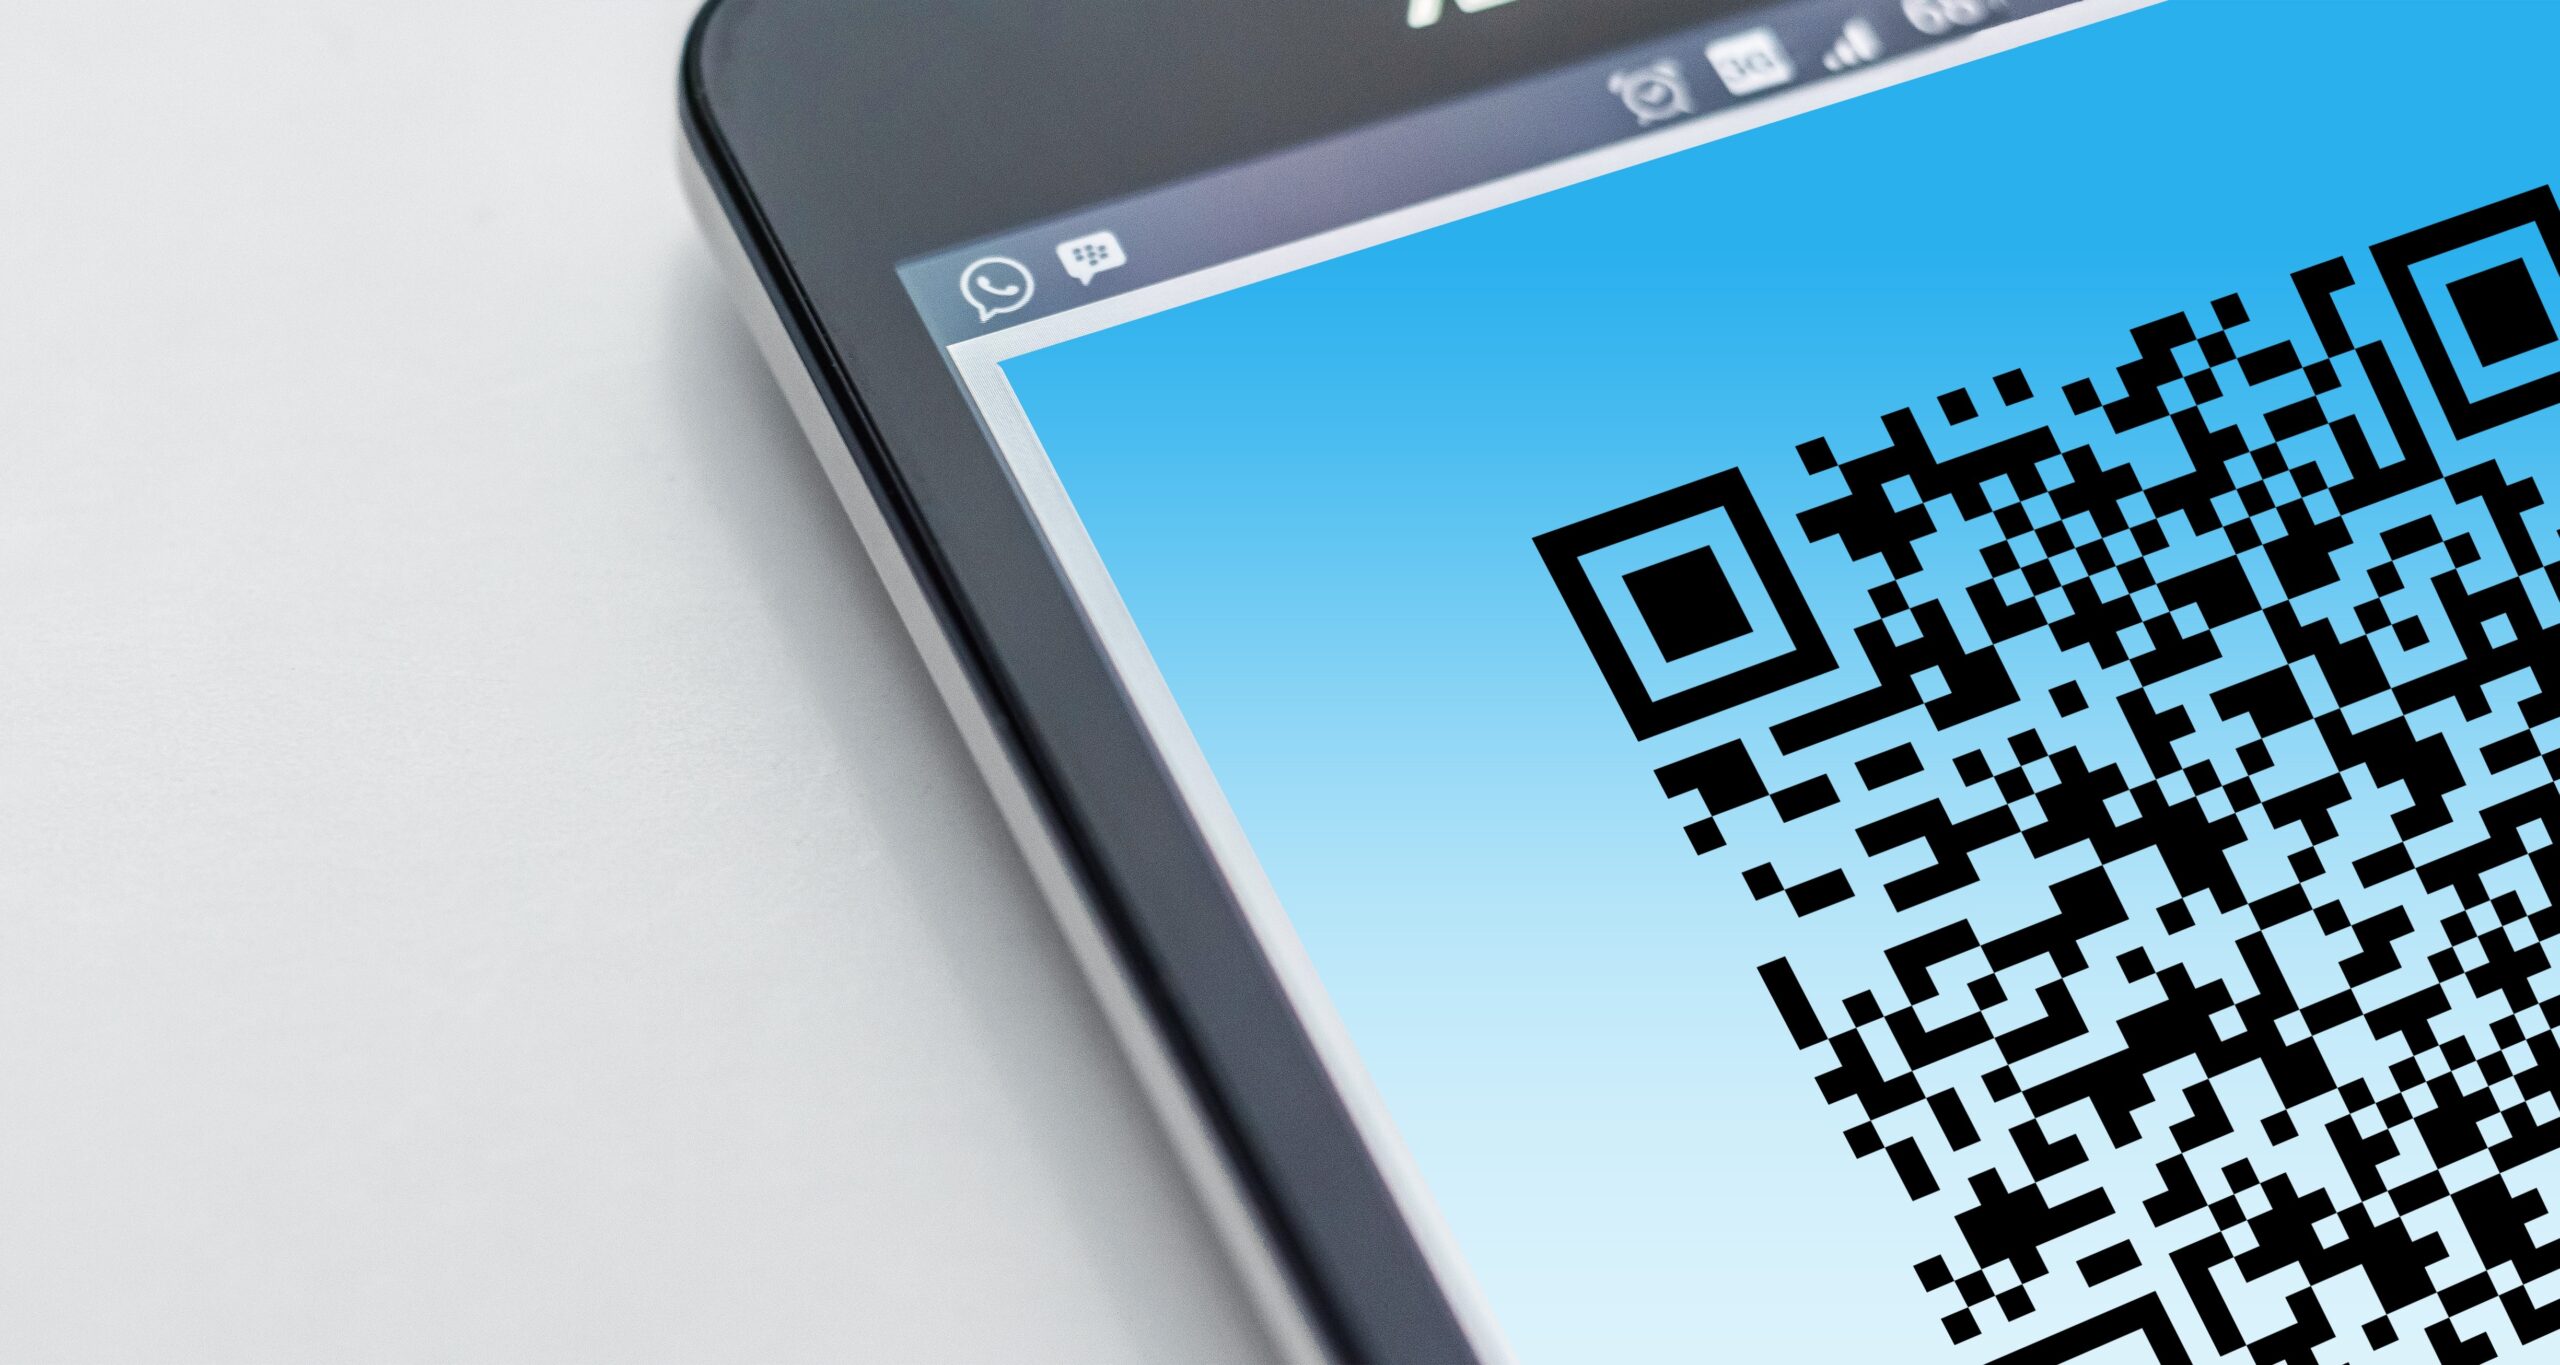 Image of QR code on phone